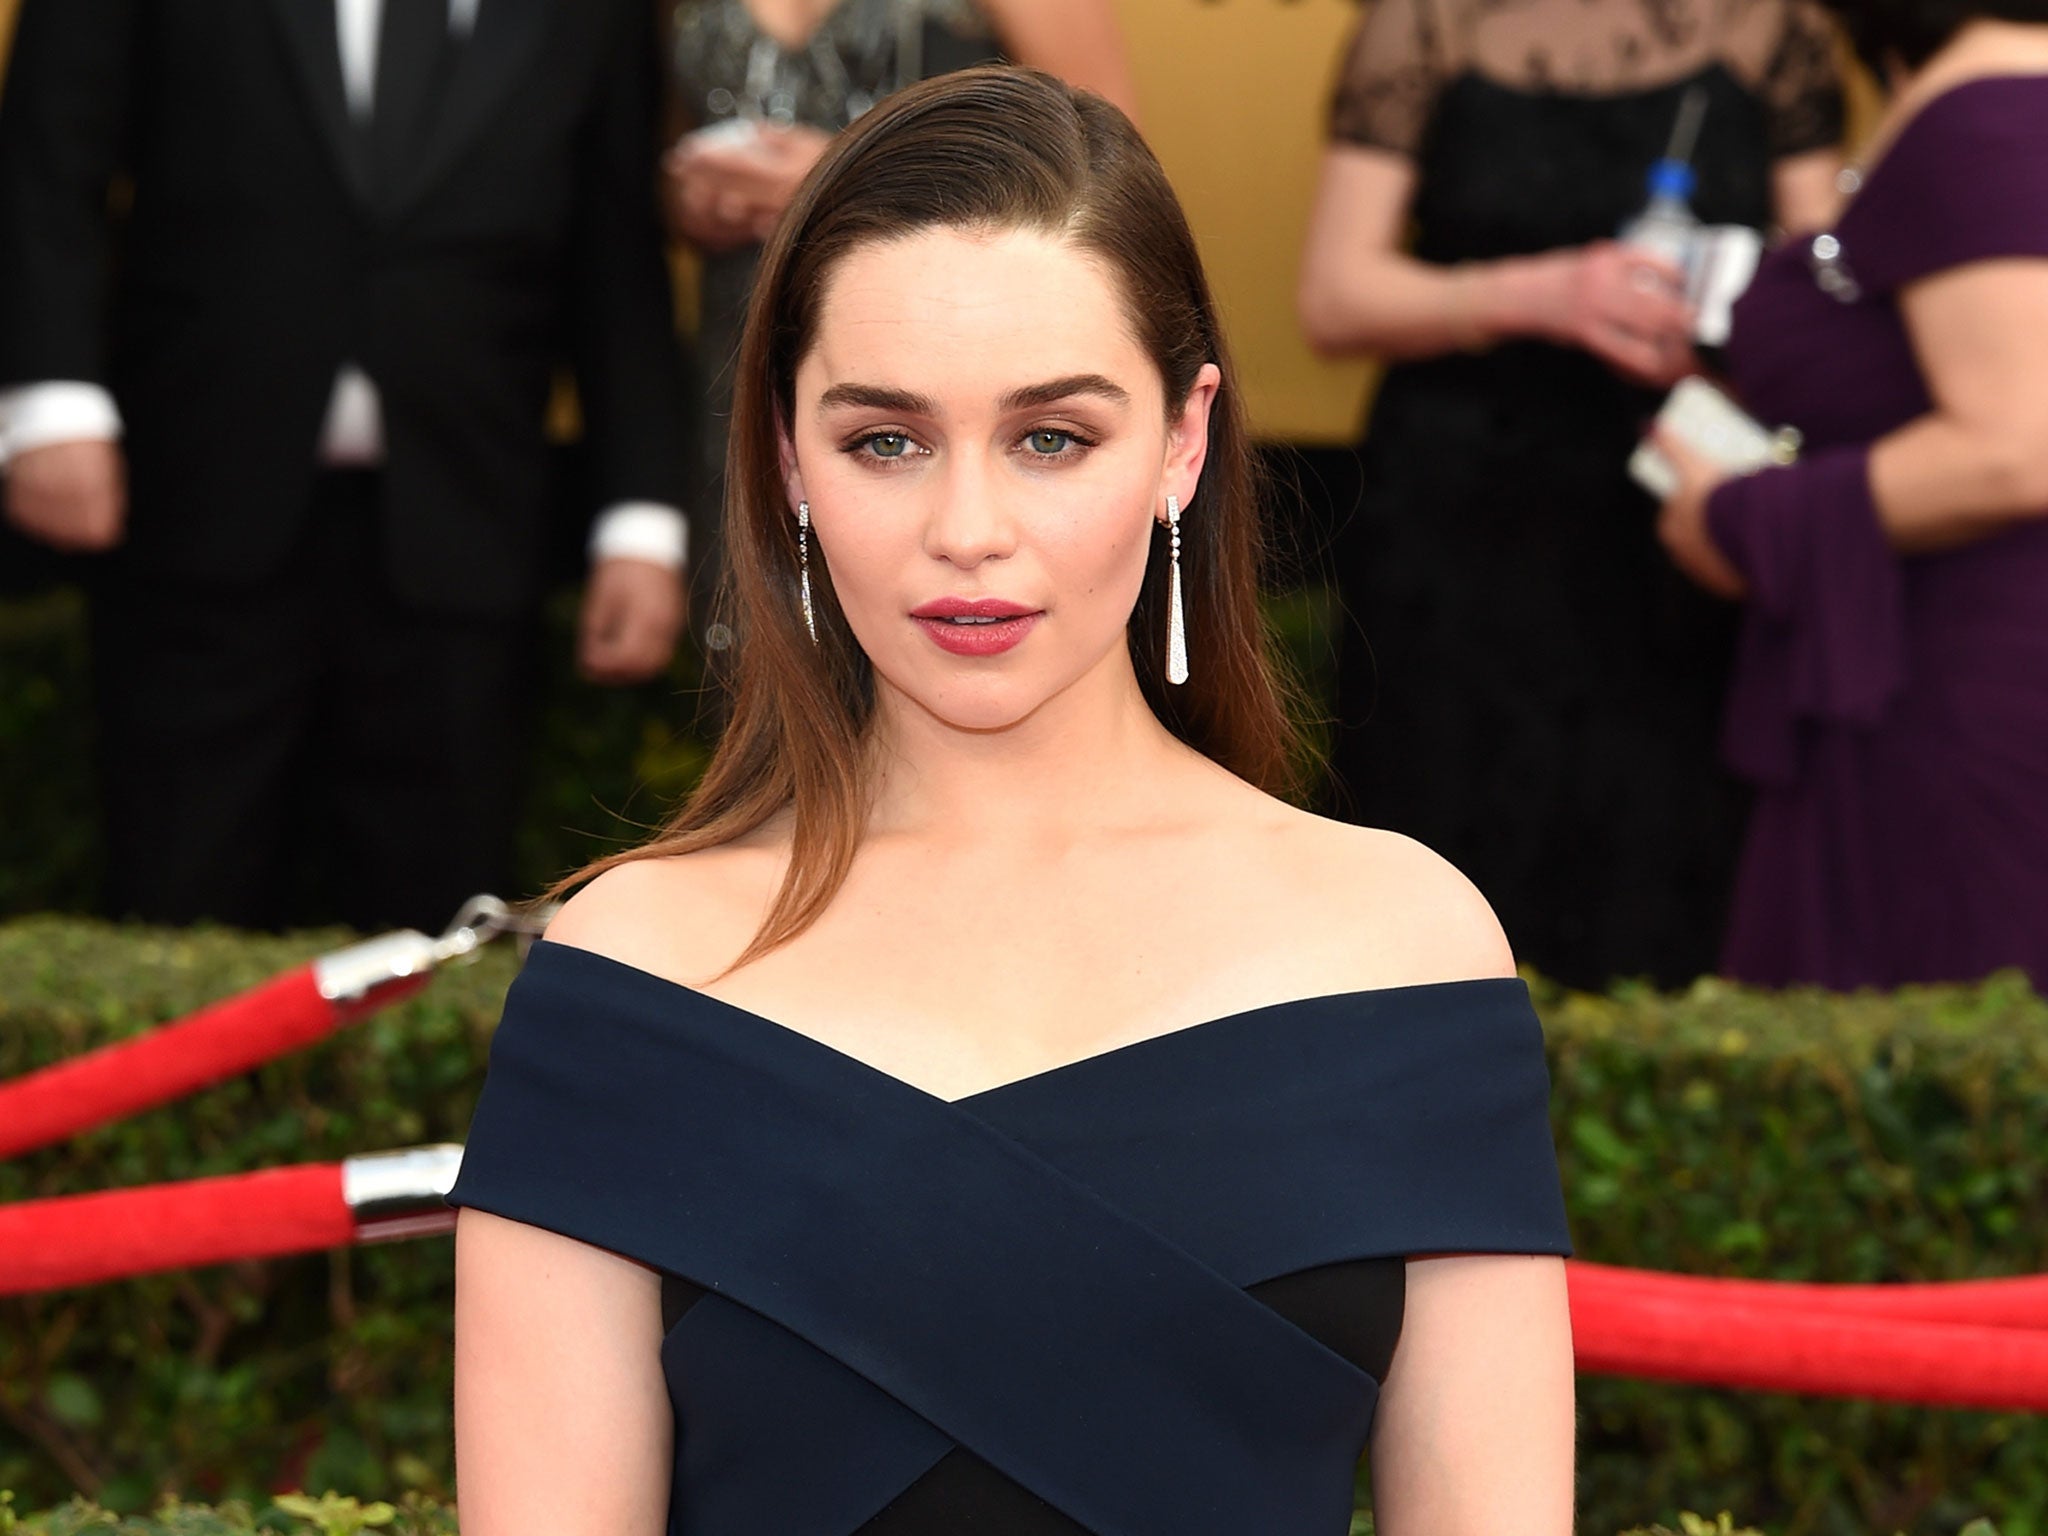 Game of Thrones star Emilia Clarke has addressed criticism on the treatment of women on the hit HBO show